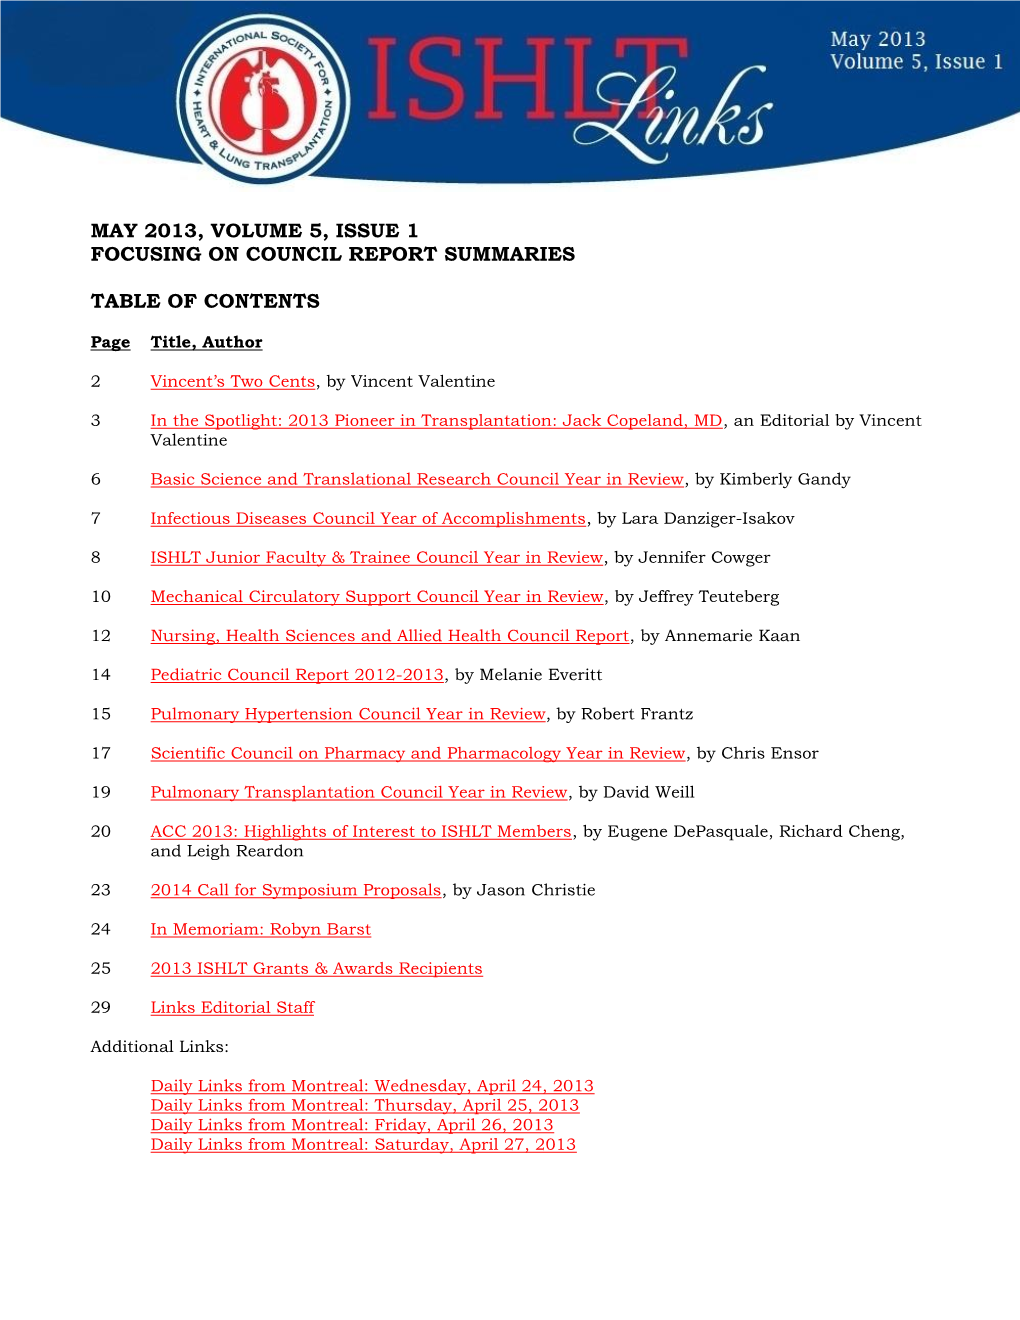 May 2013, Volume 5, Issue 1 Focusing on Council Report Summaries Table of Contents